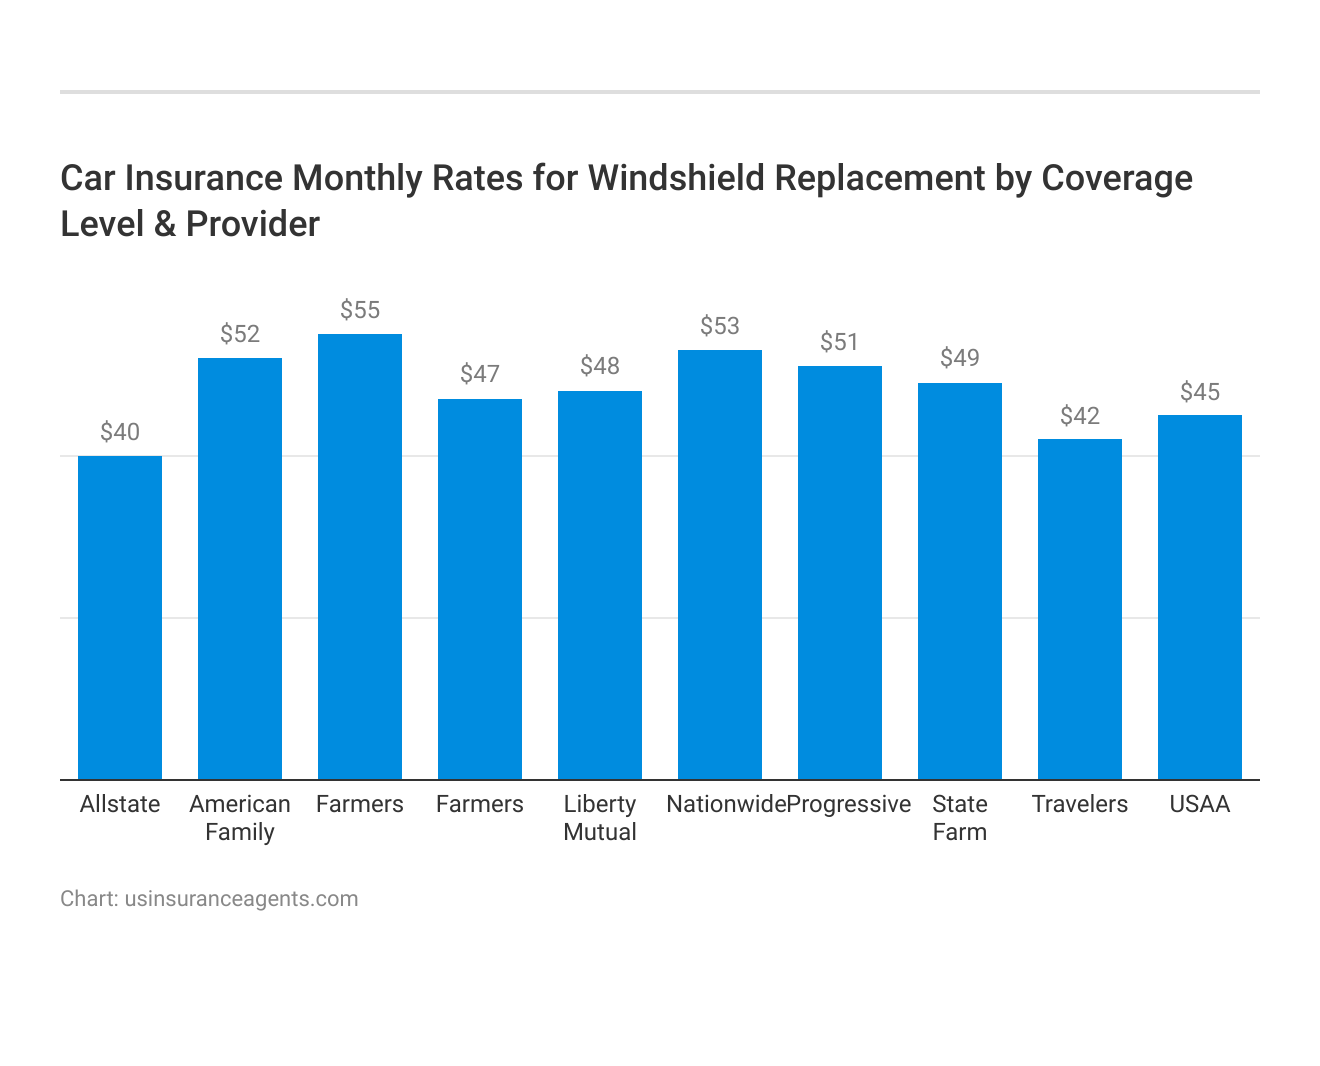 <h3>Car Insurance Monthly Rates for Windshield Replacement by Coverage Level & Provider</h3>